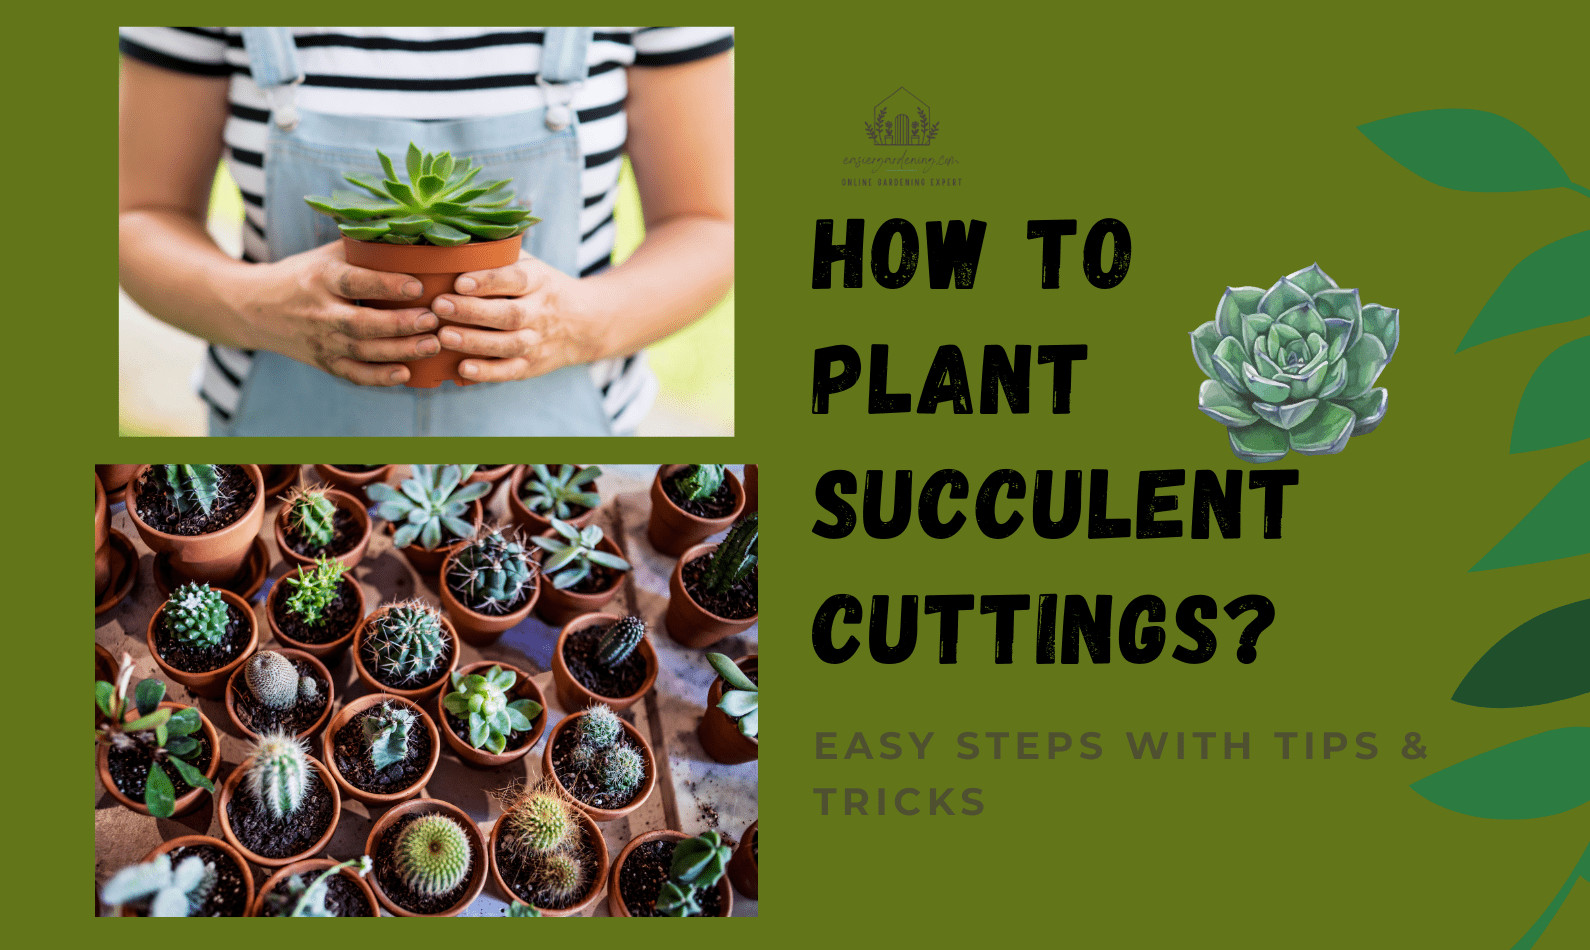 How to Plant Succulent Cuttings?